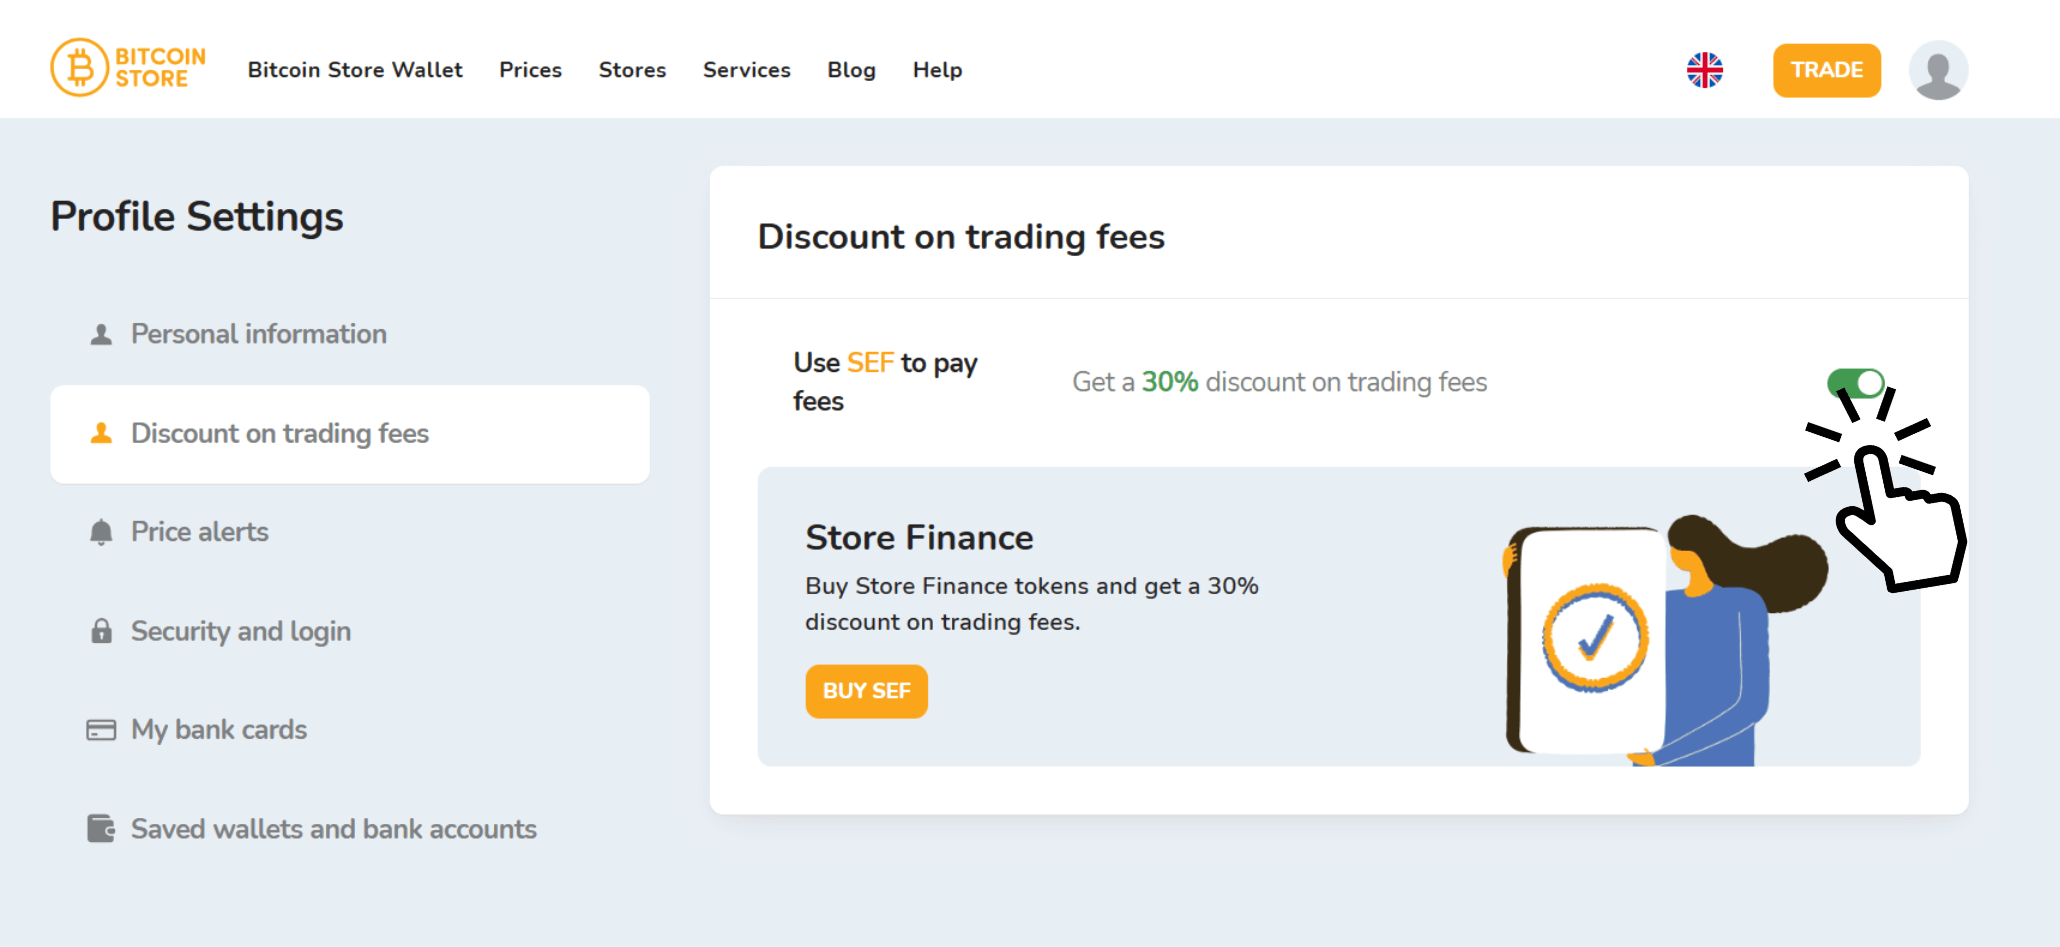 The Bitcoin Store Wallet app screenshot shows how to turn on the feature to pay 30% less on cryptocurrency trading fees.